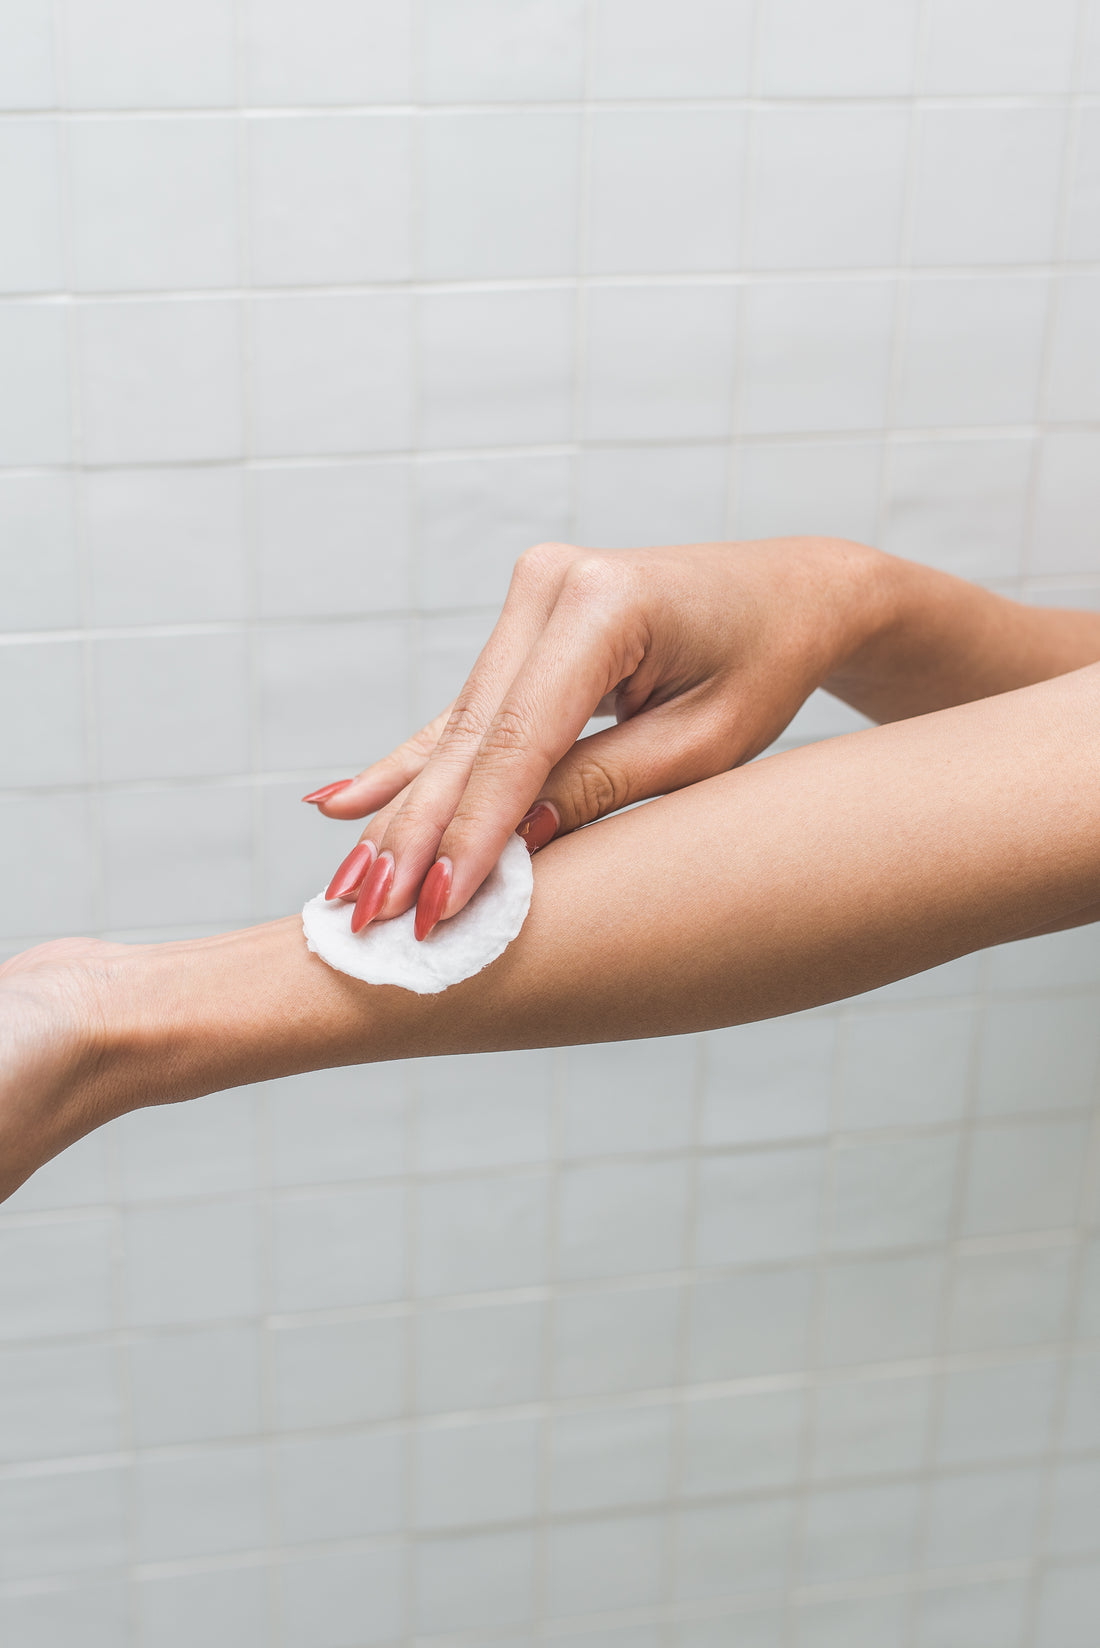 Top Tips for an Effective Eczema Skincare Routine